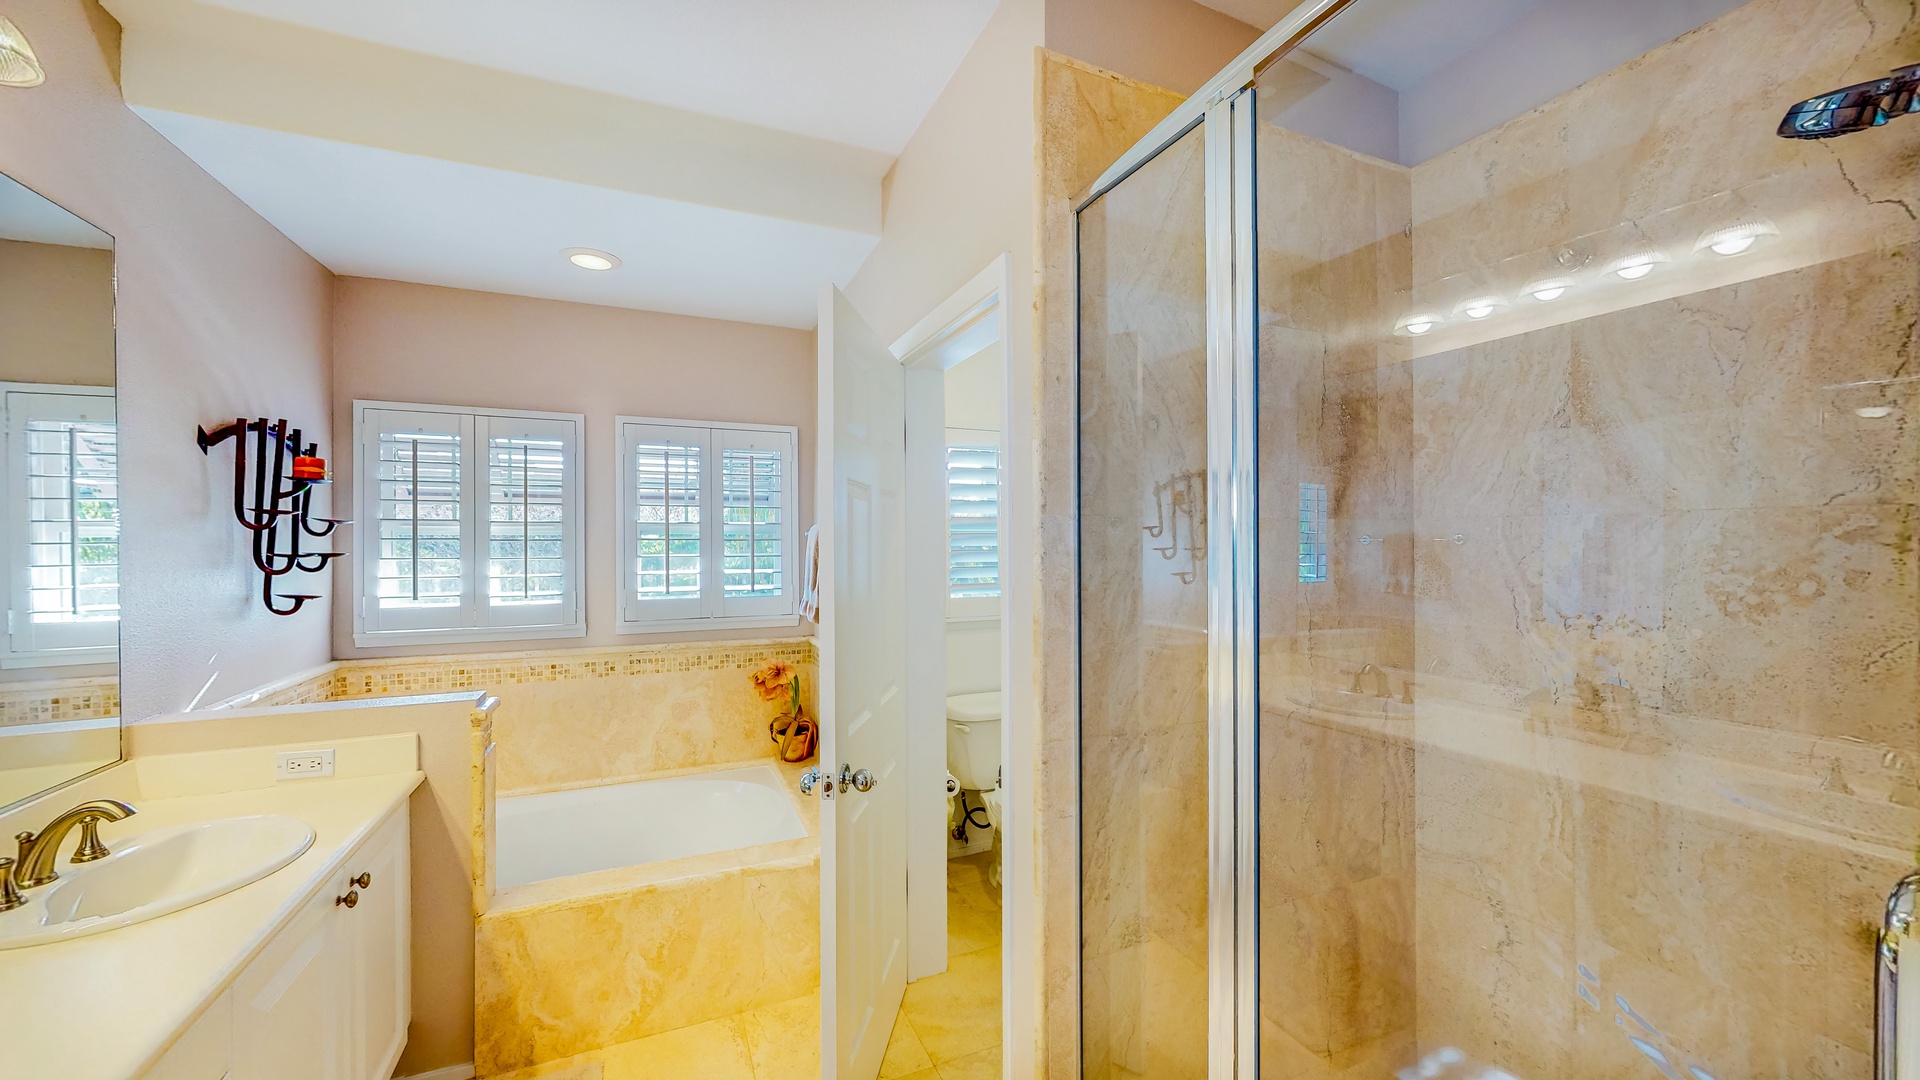 Kapolei Vacation Rentals, Coconut Plantation 1074-1 - The spacious primary guest bathroom with walk-in shower.